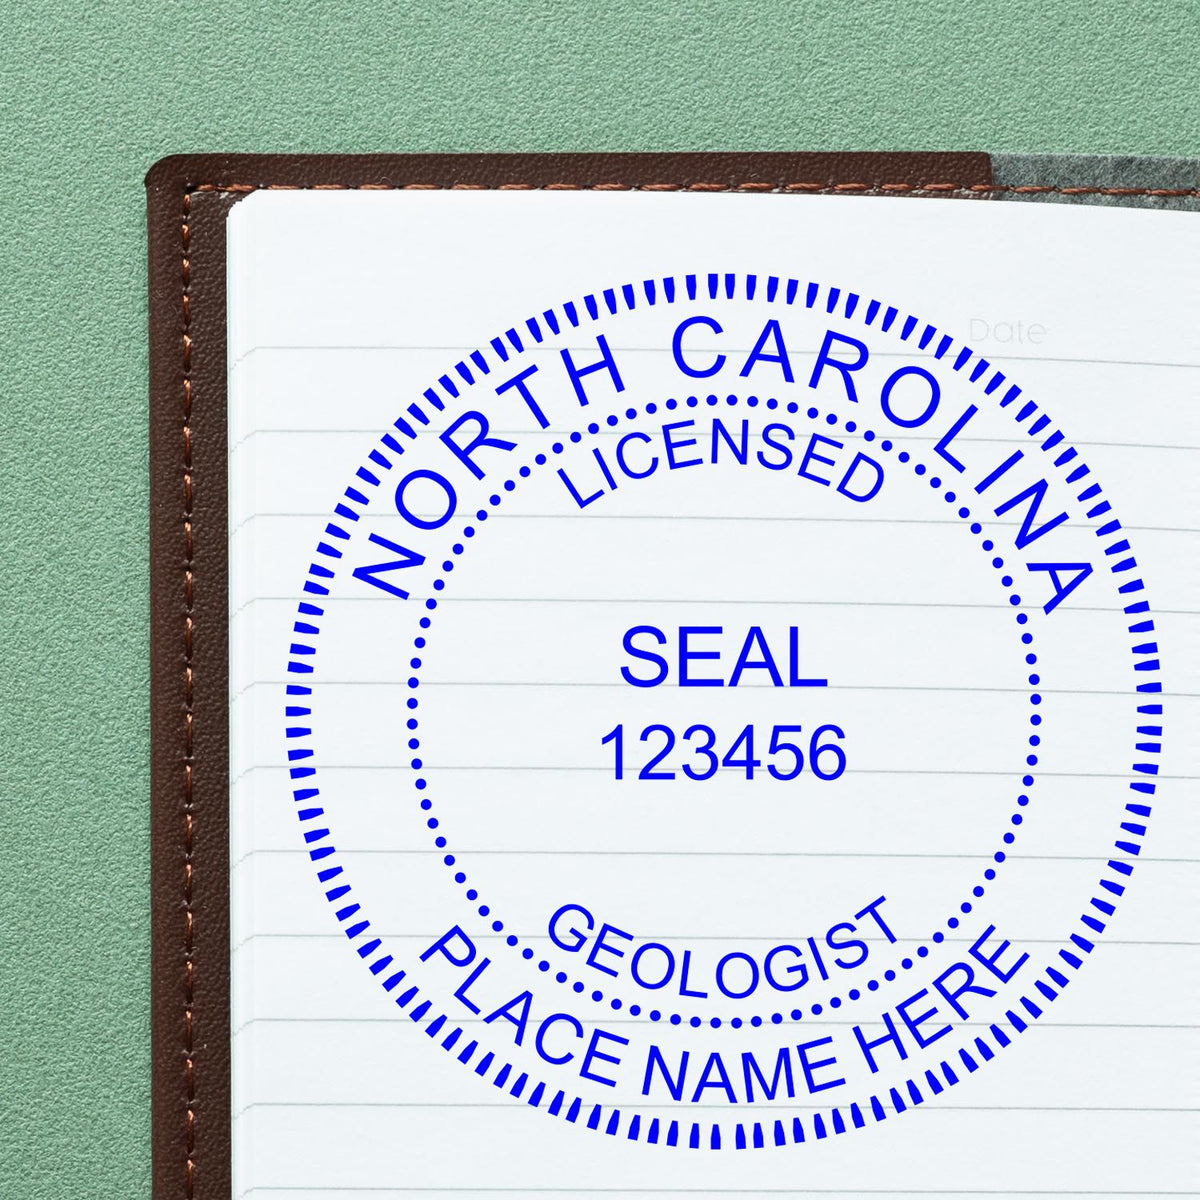 This paper is stamped with a sample imprint of the Self-Inking North Carolina Geologist Stamp, signifying its quality and reliability.